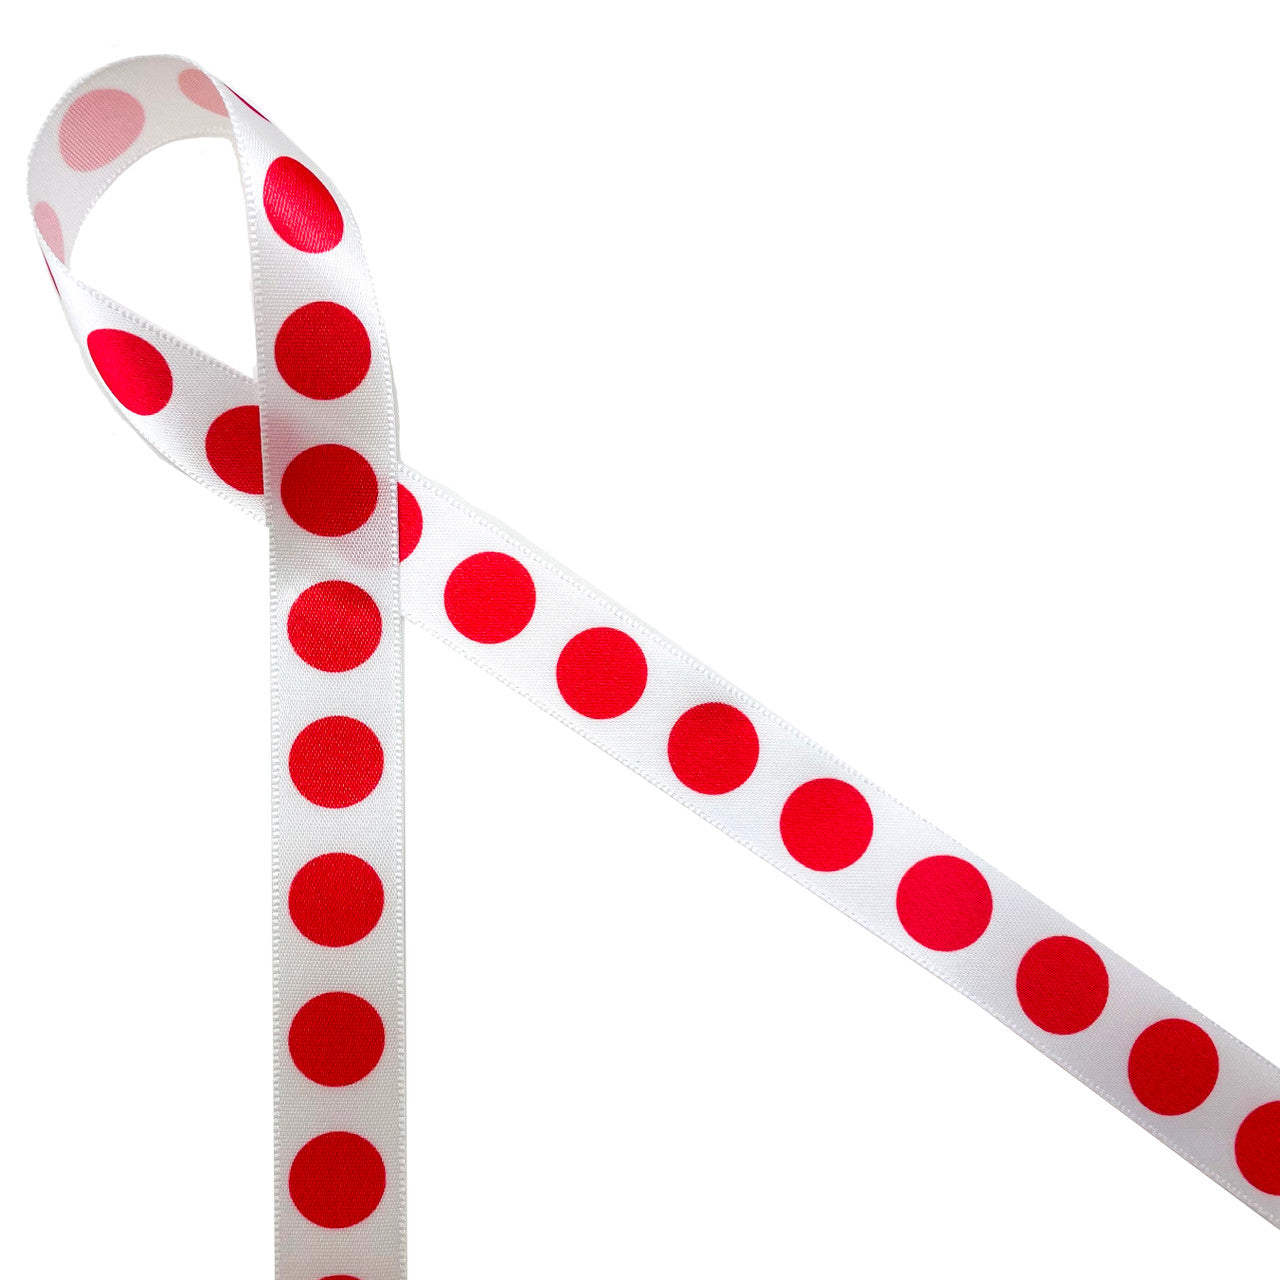 Large red dots in a row printed on 5/8" white single face satin ribbon is versatile ribbon for so many occasions! This is a fun ribbon for birthdays, Christmas, and Valentine's Day. This is a great ribbon for gift wrap, gift baskets, party decor, party favors, cookies, cake pops and candy shops. Be sure to have this ribbon on hand for any red and white event that may arise! All our ribbon is designed and printed in the USA